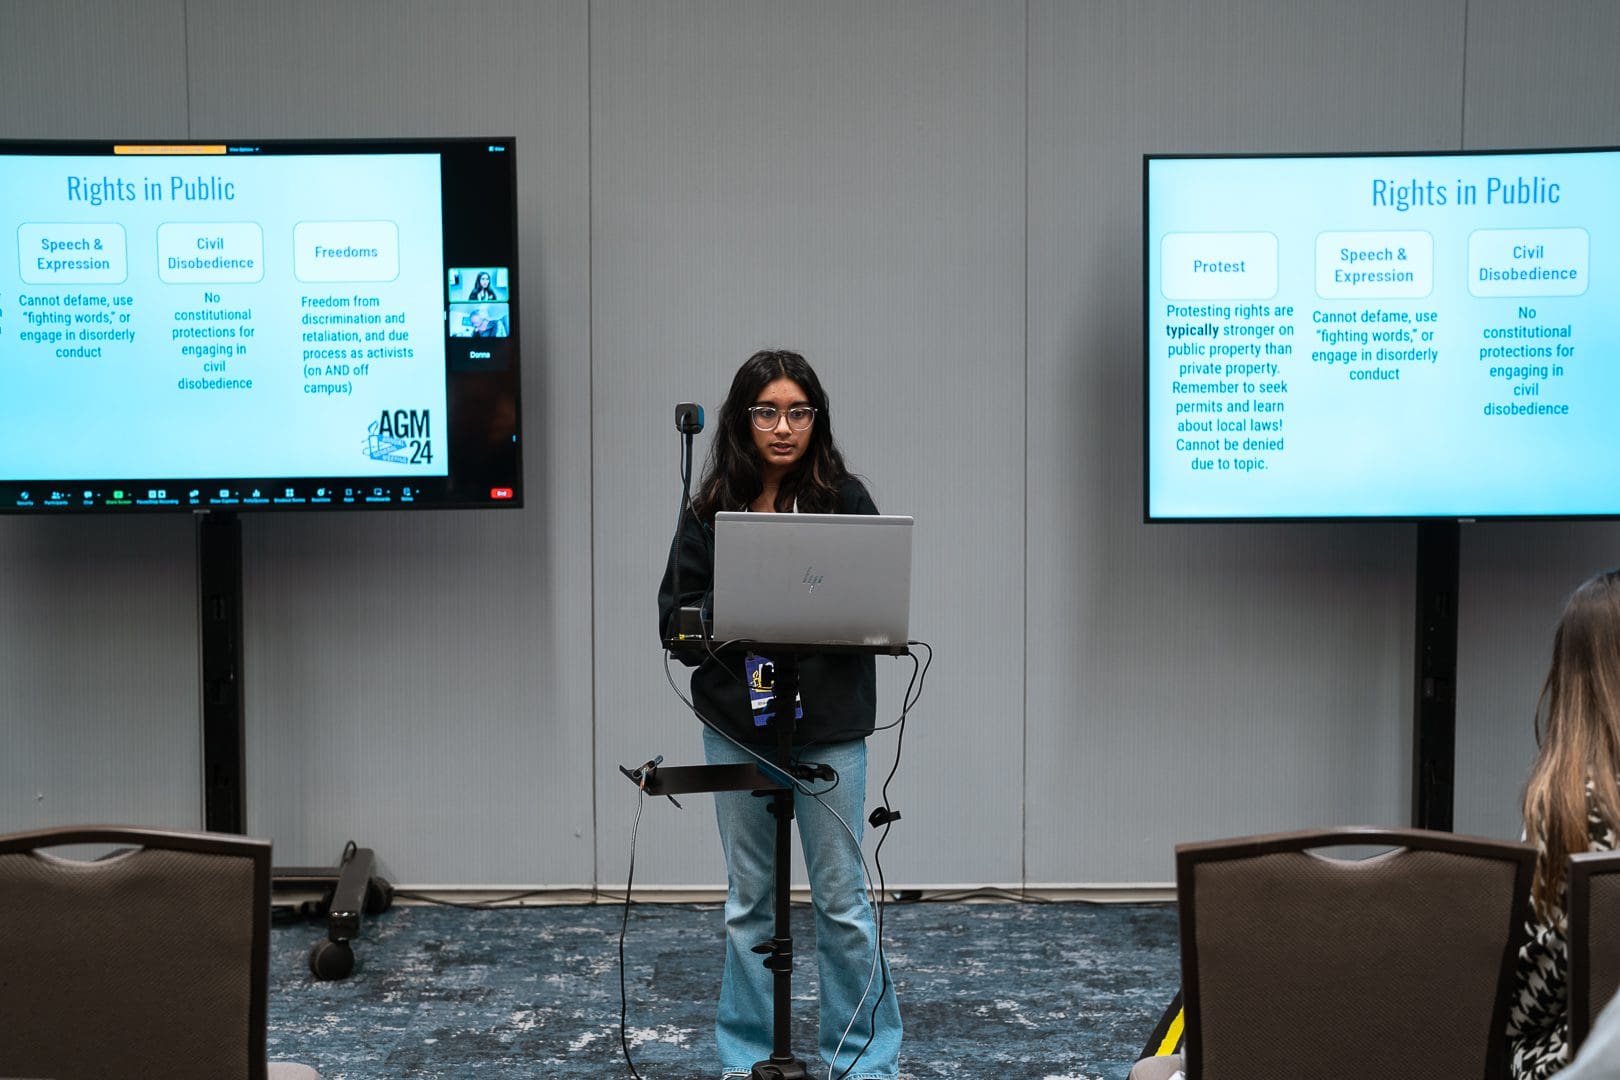 Bhavna Bangalore, Youth Collective Member from New Jersey, co-presented “How to: Activism in Hostile Environments